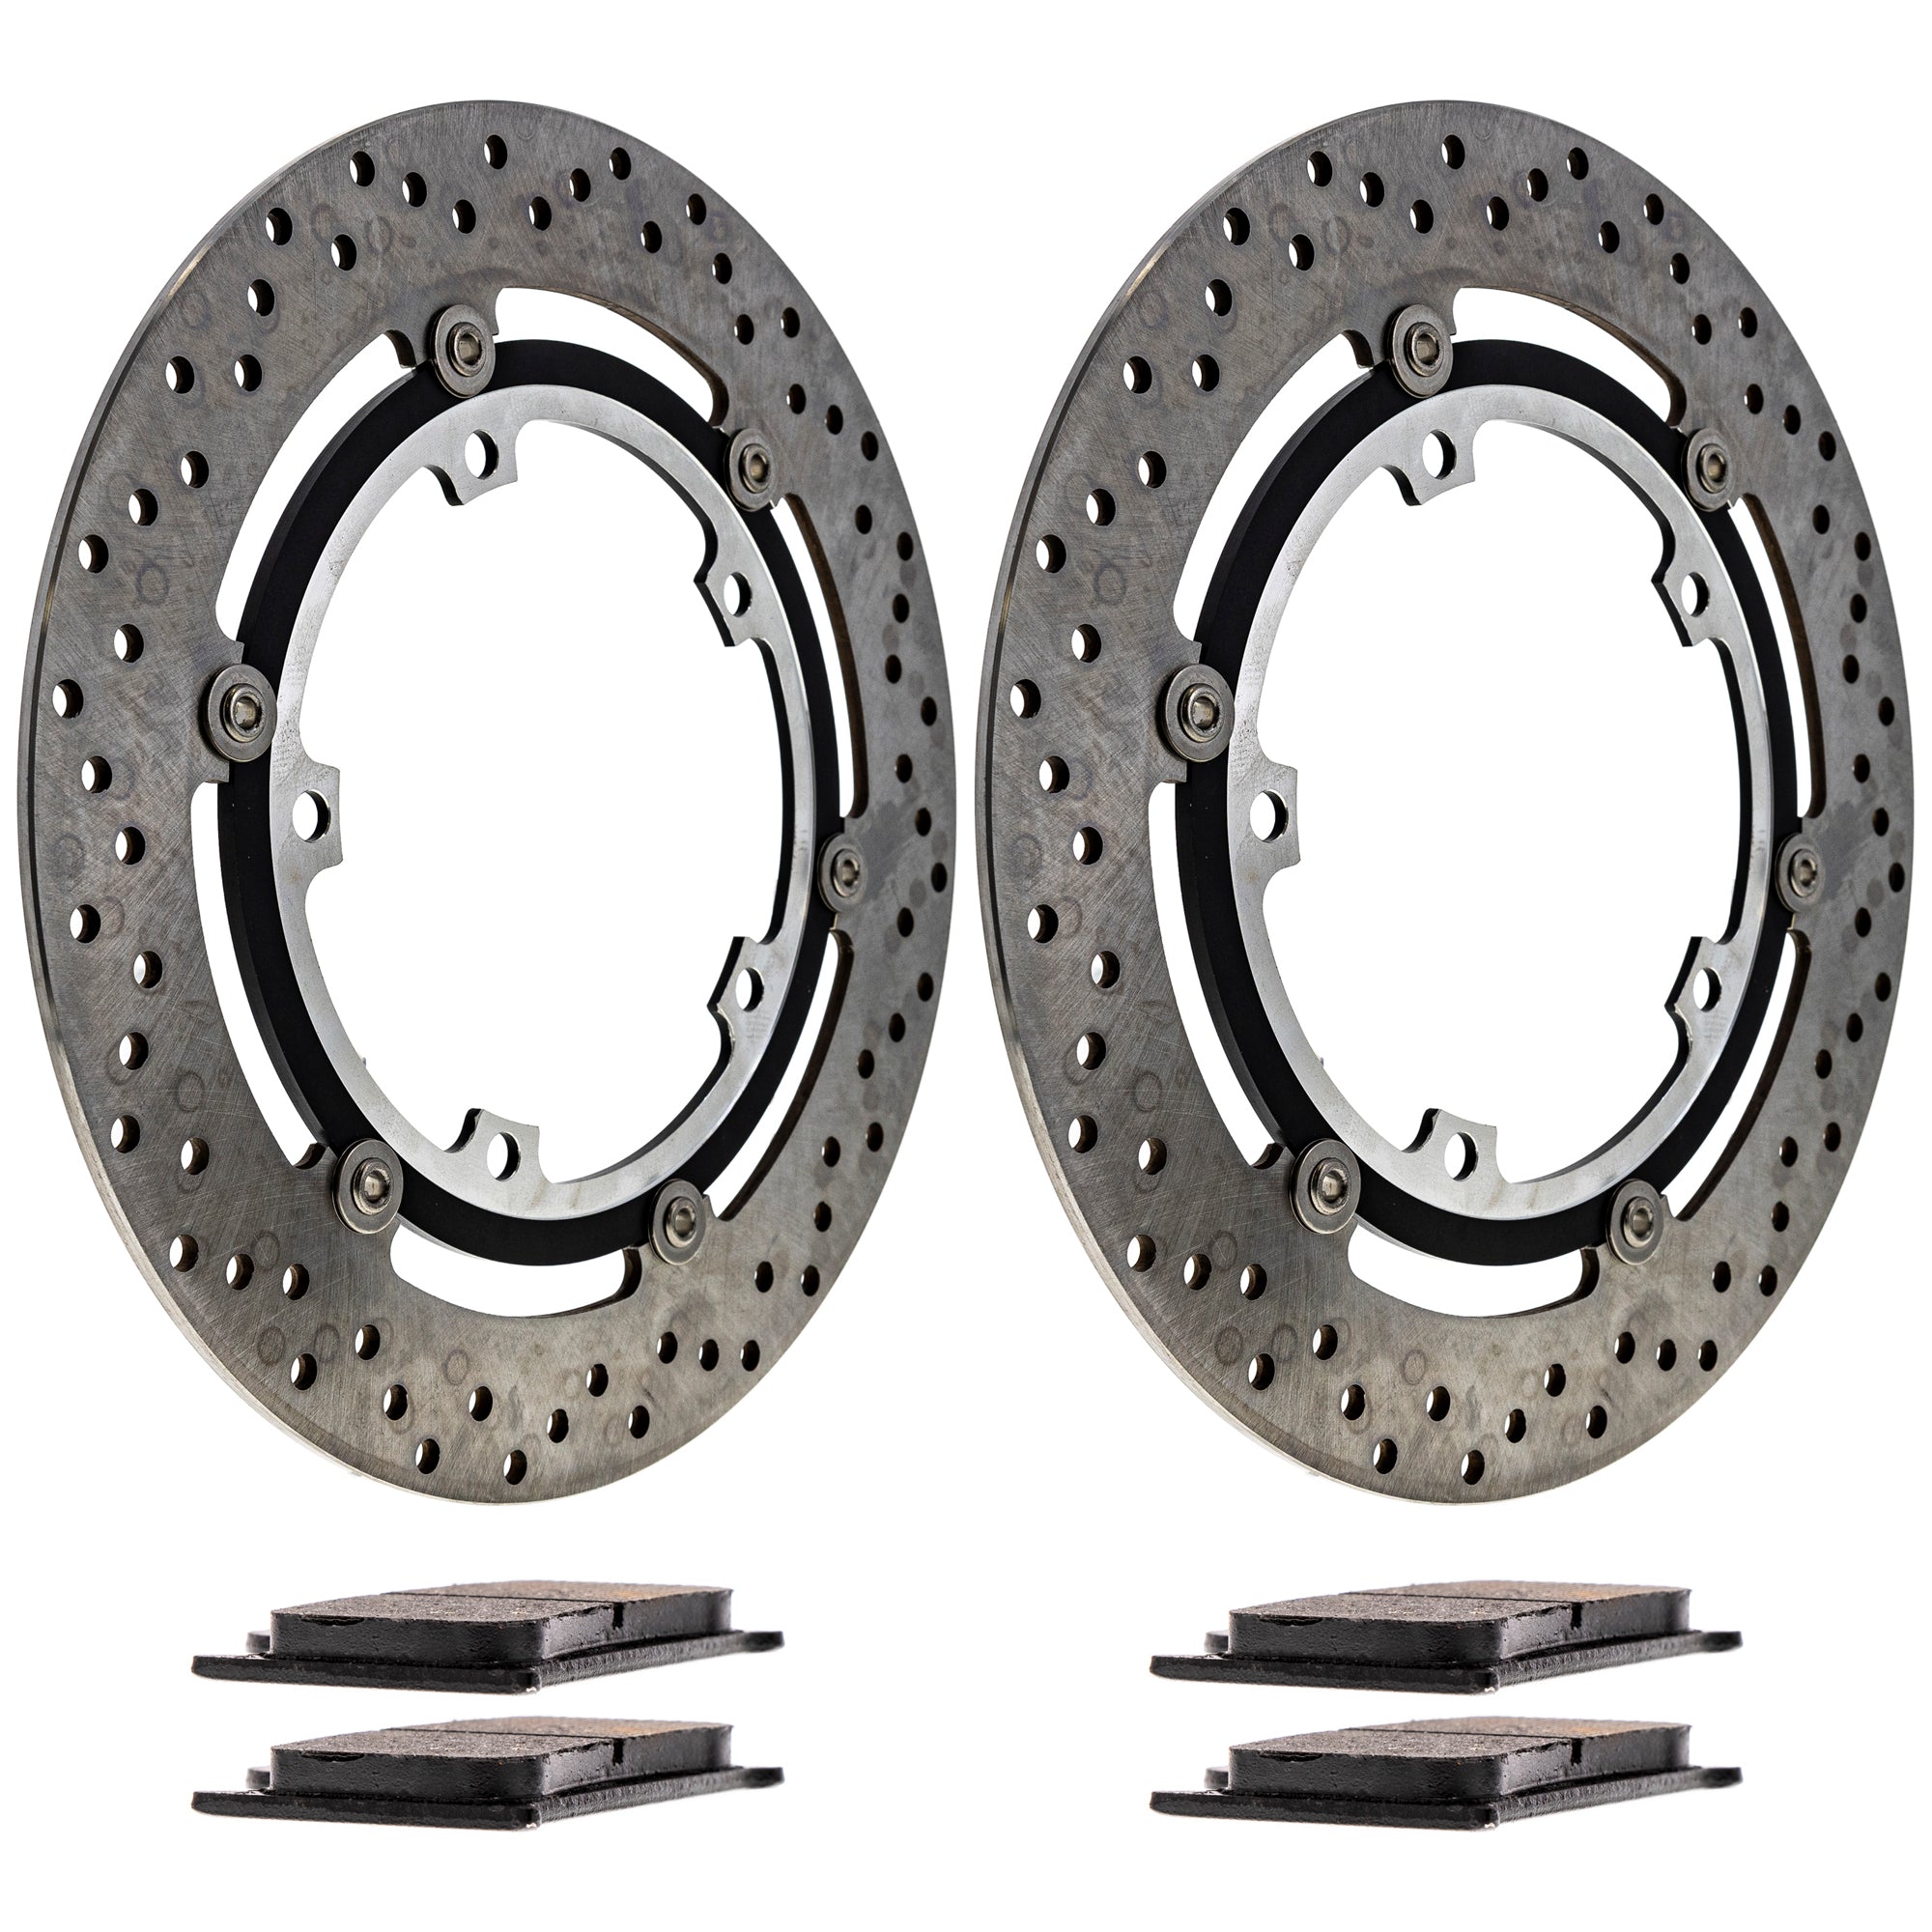 Front Brake Rotors and Pads Kit for zOTHER KTM Sprint Speed T2020393 T2020245 T2020553 NICHE MK1007277